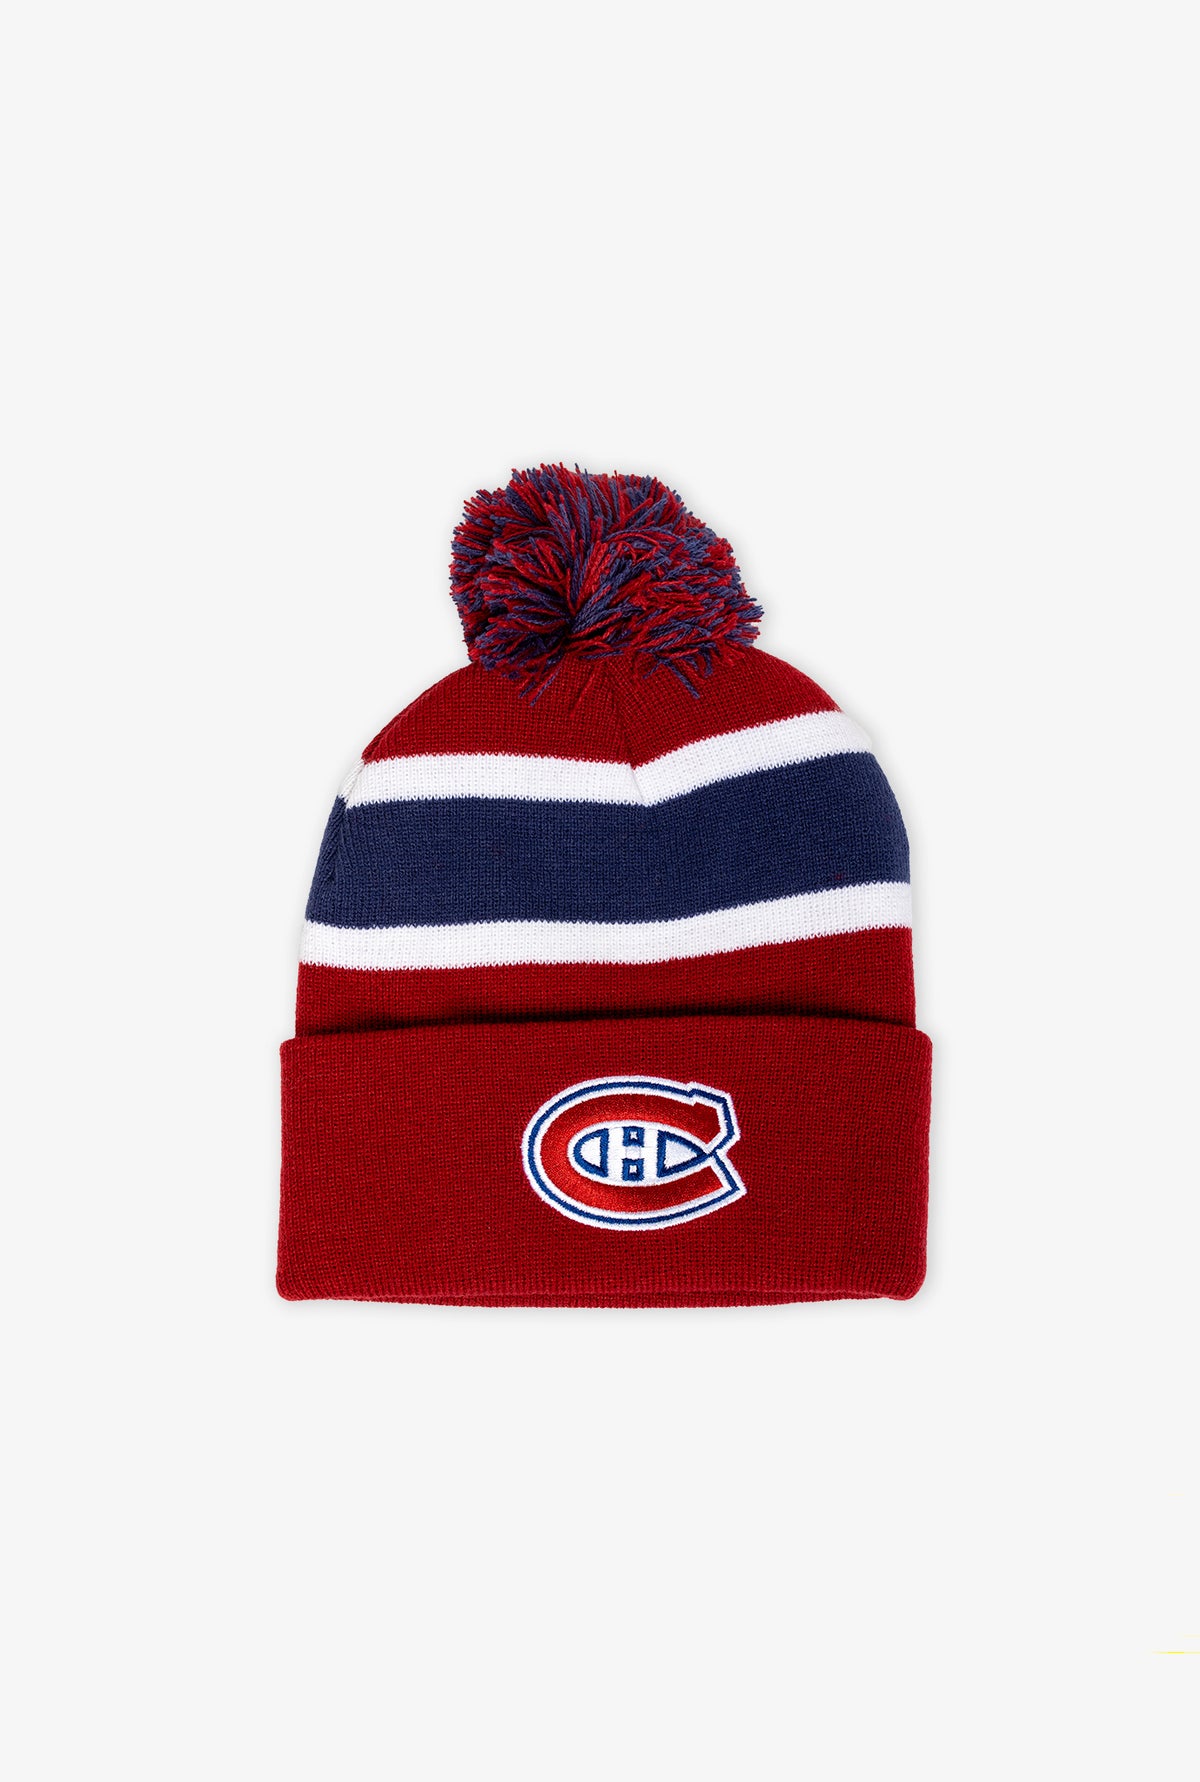 Montreal Canadiens Pom Stripe Knit Toque - Red